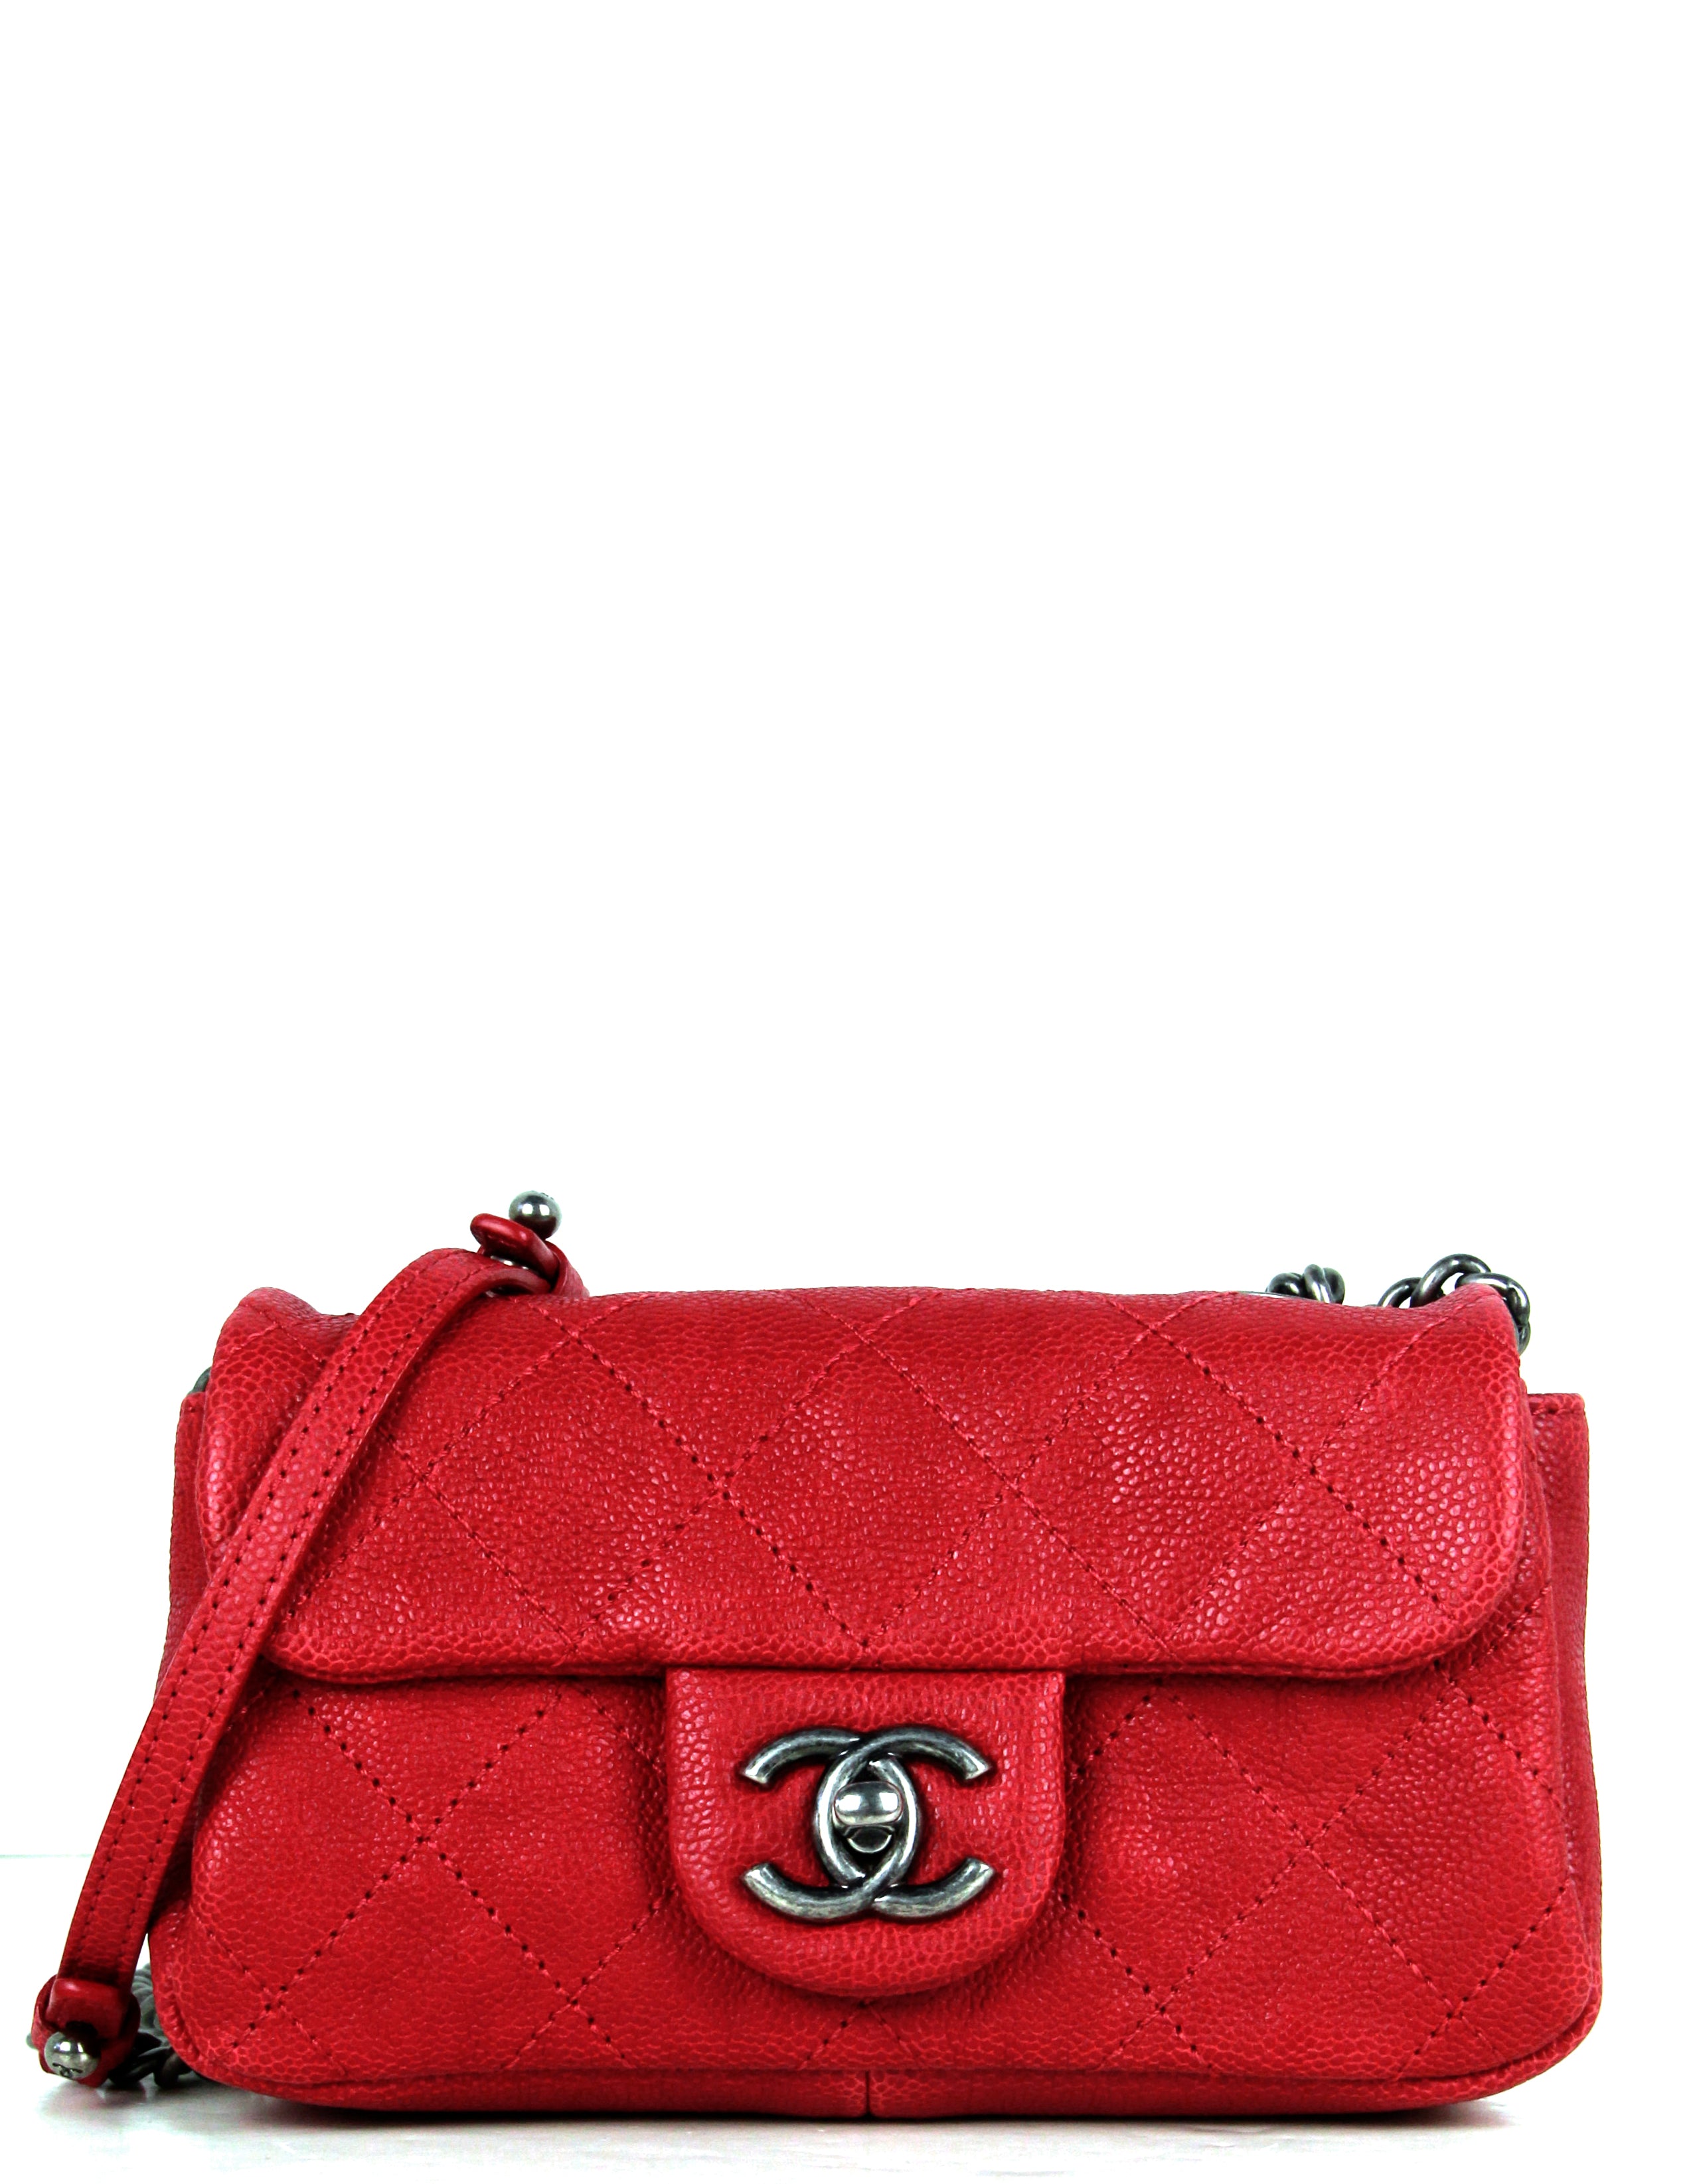 Chanel Red Caviar Leather Quilted Mini Simply CC Flap Bag